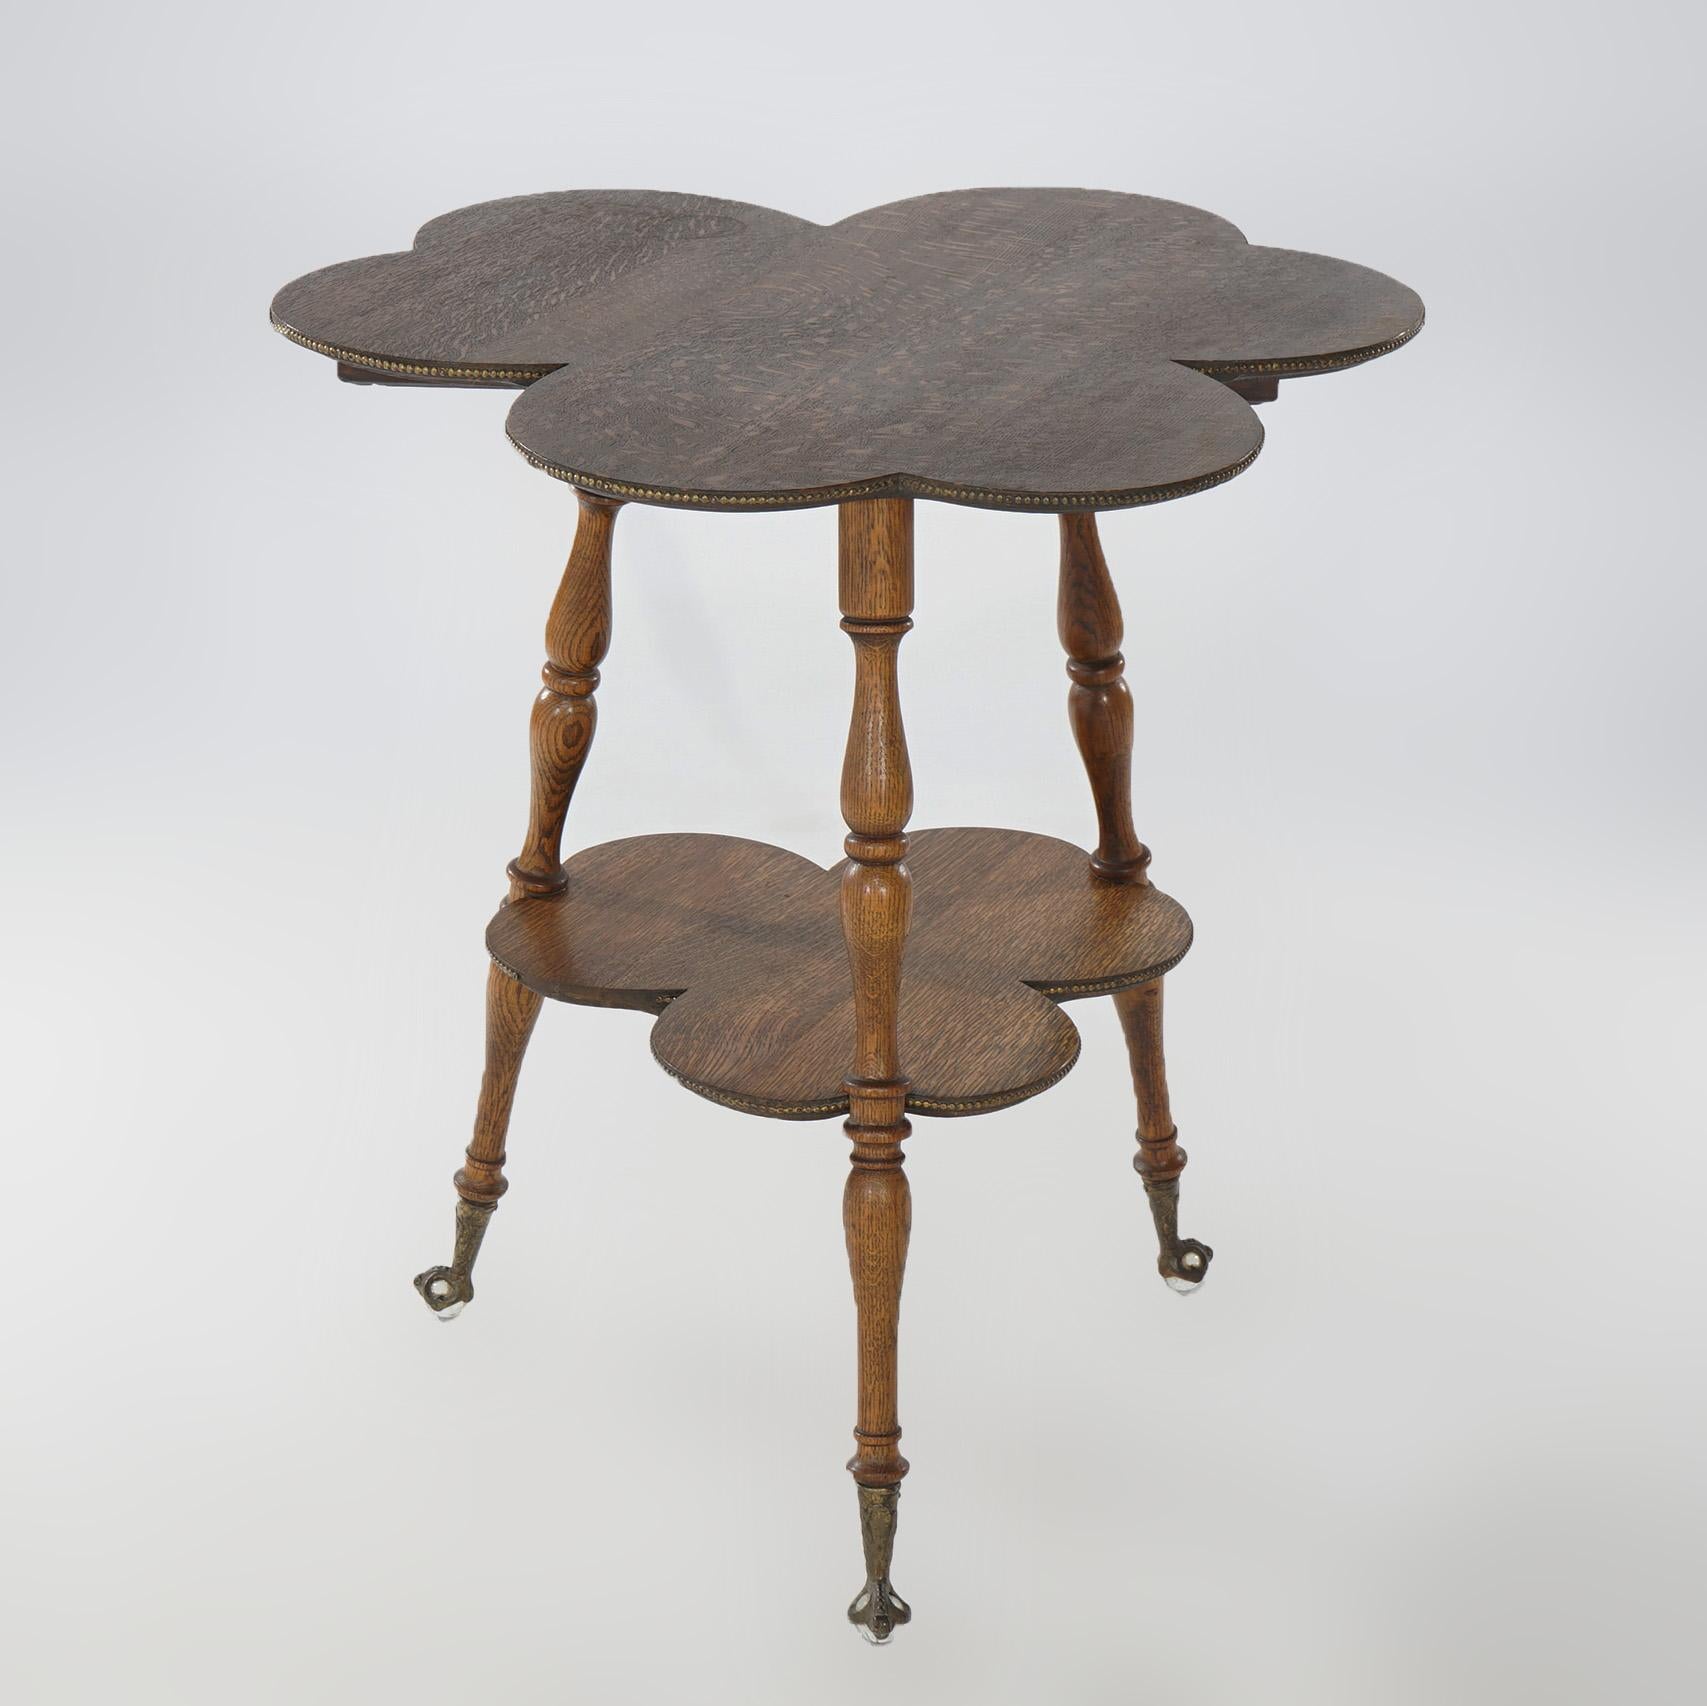 An antique parlor table offers quarter sawn oak construction with top in clover leaf form and having brass bead trimming over matching lower shelf, raised on turned legs terminating in brass claw and glass ball feet, circa 1900

Measures - 29.5